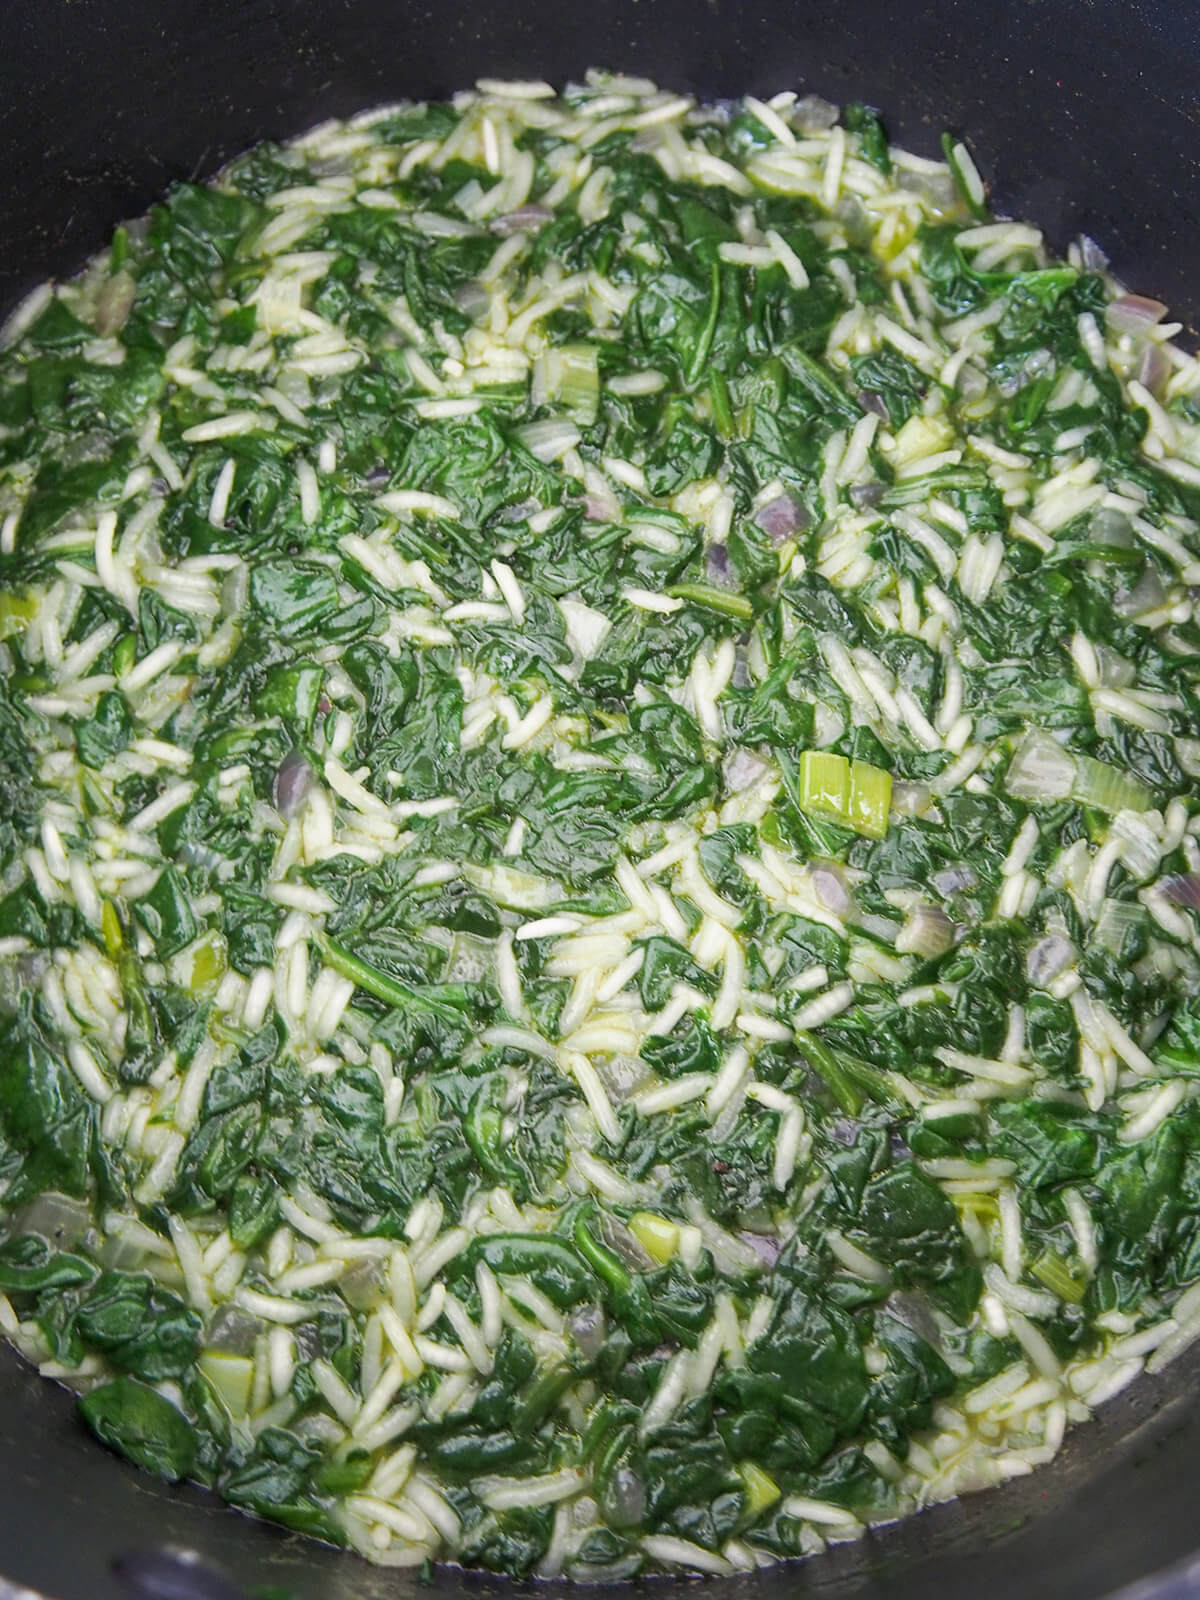 simmering spinach and rice mixture to cook rice and absorb liquid